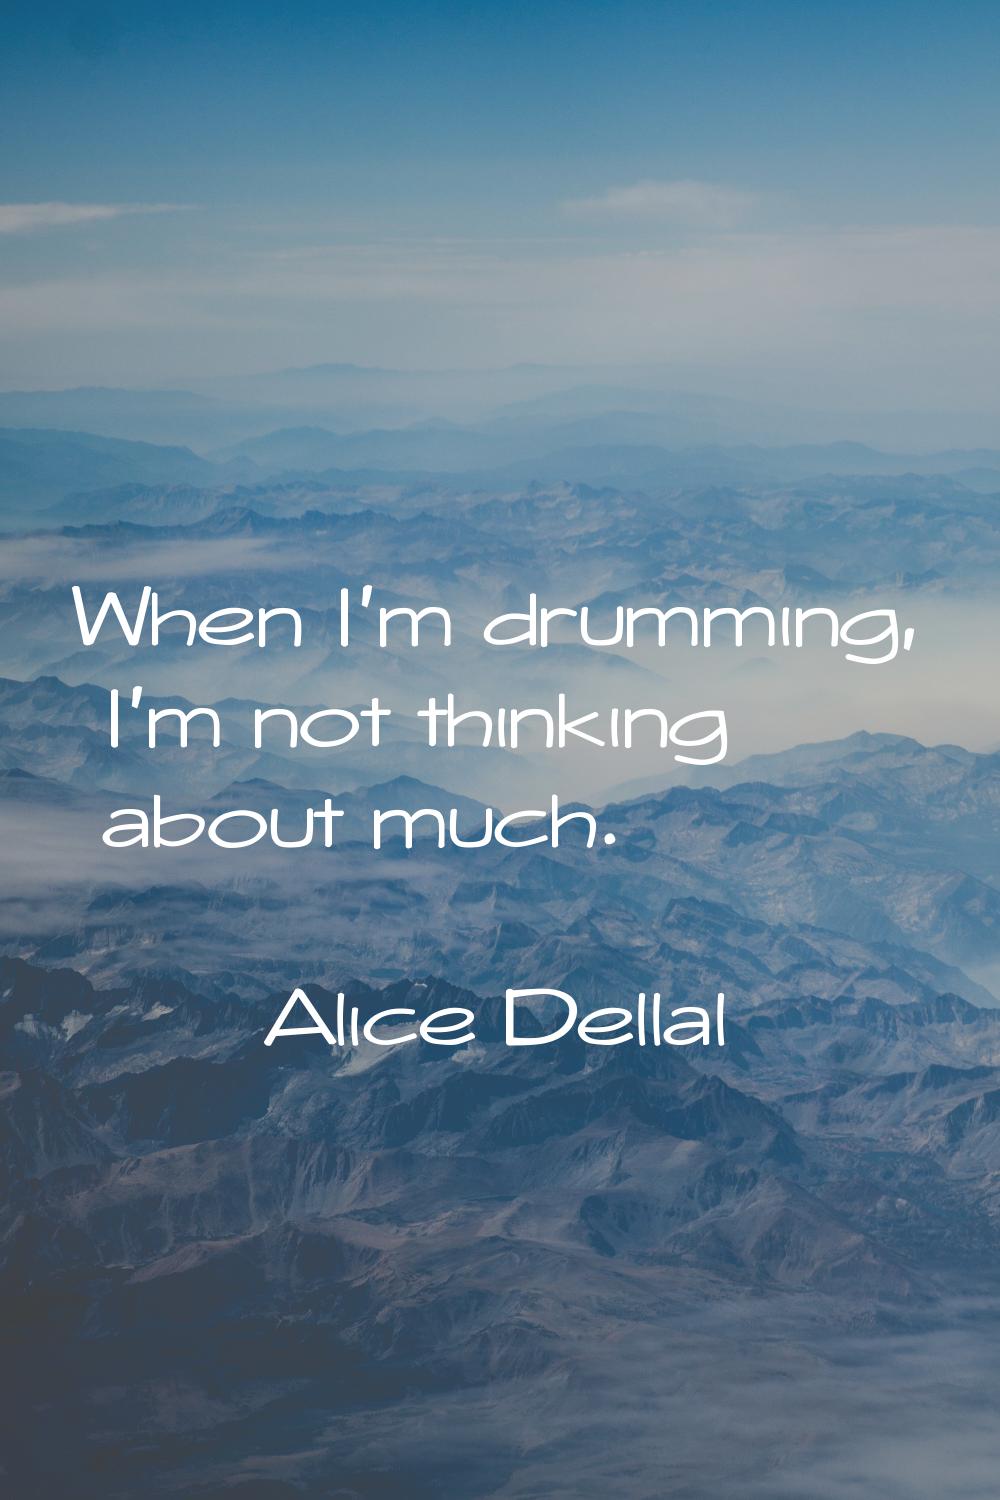 When I'm drumming, I'm not thinking about much.